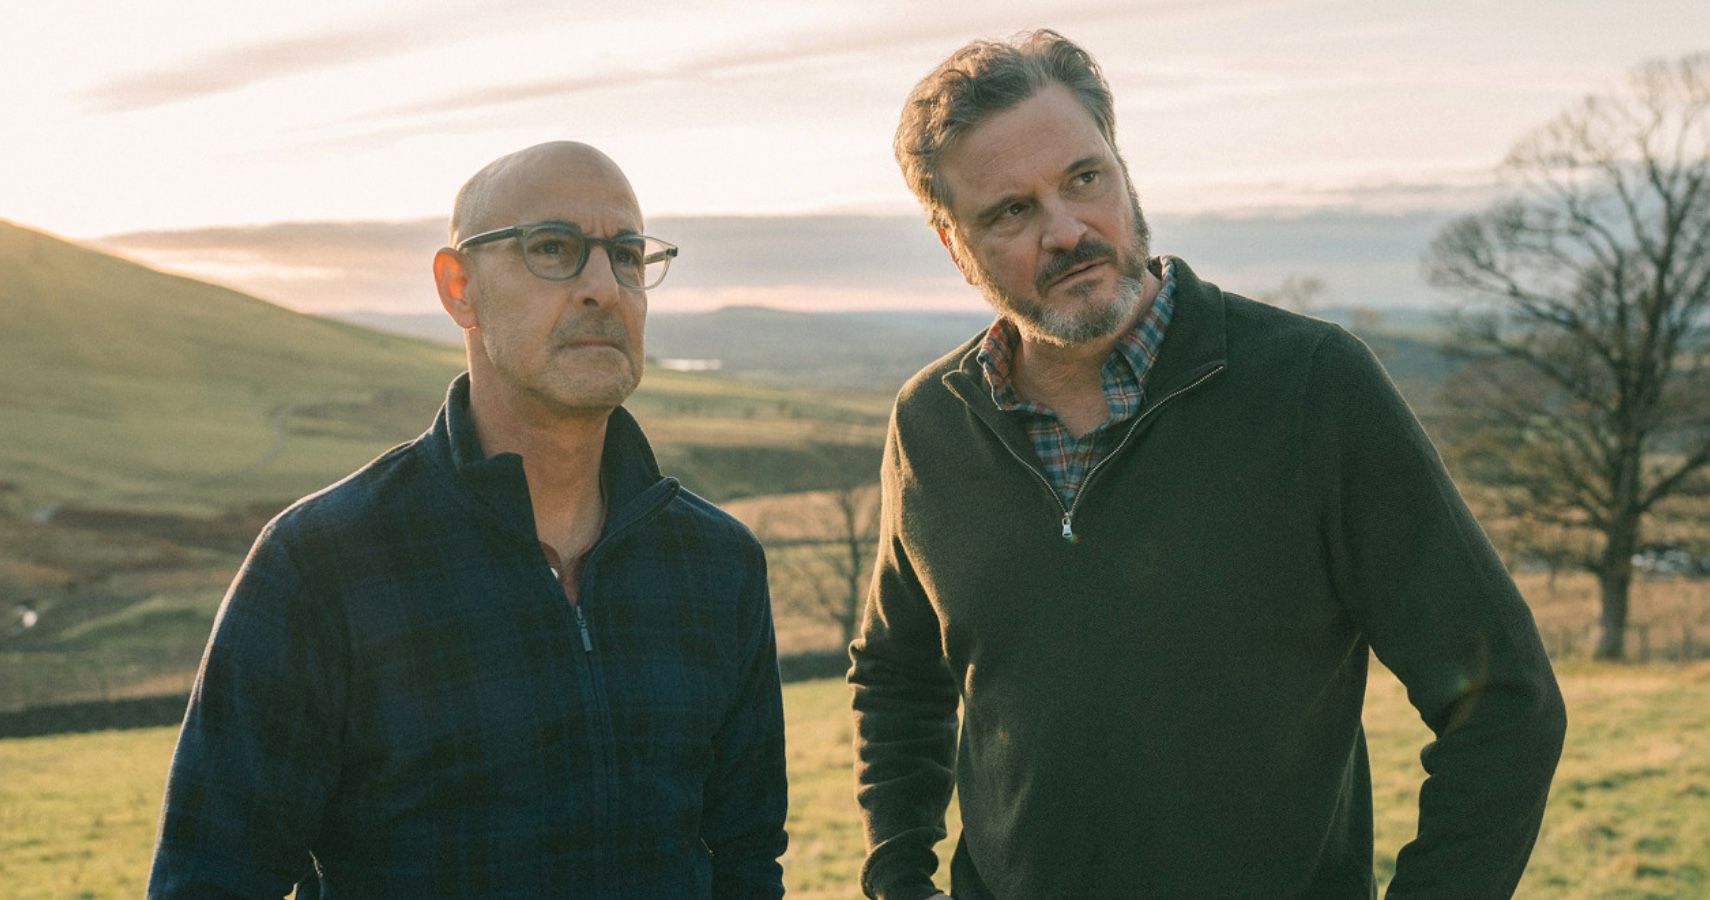 Stanley Tucci And Colin Firth Revealed They Switched Roles For Queer Drama ‘Supernova’